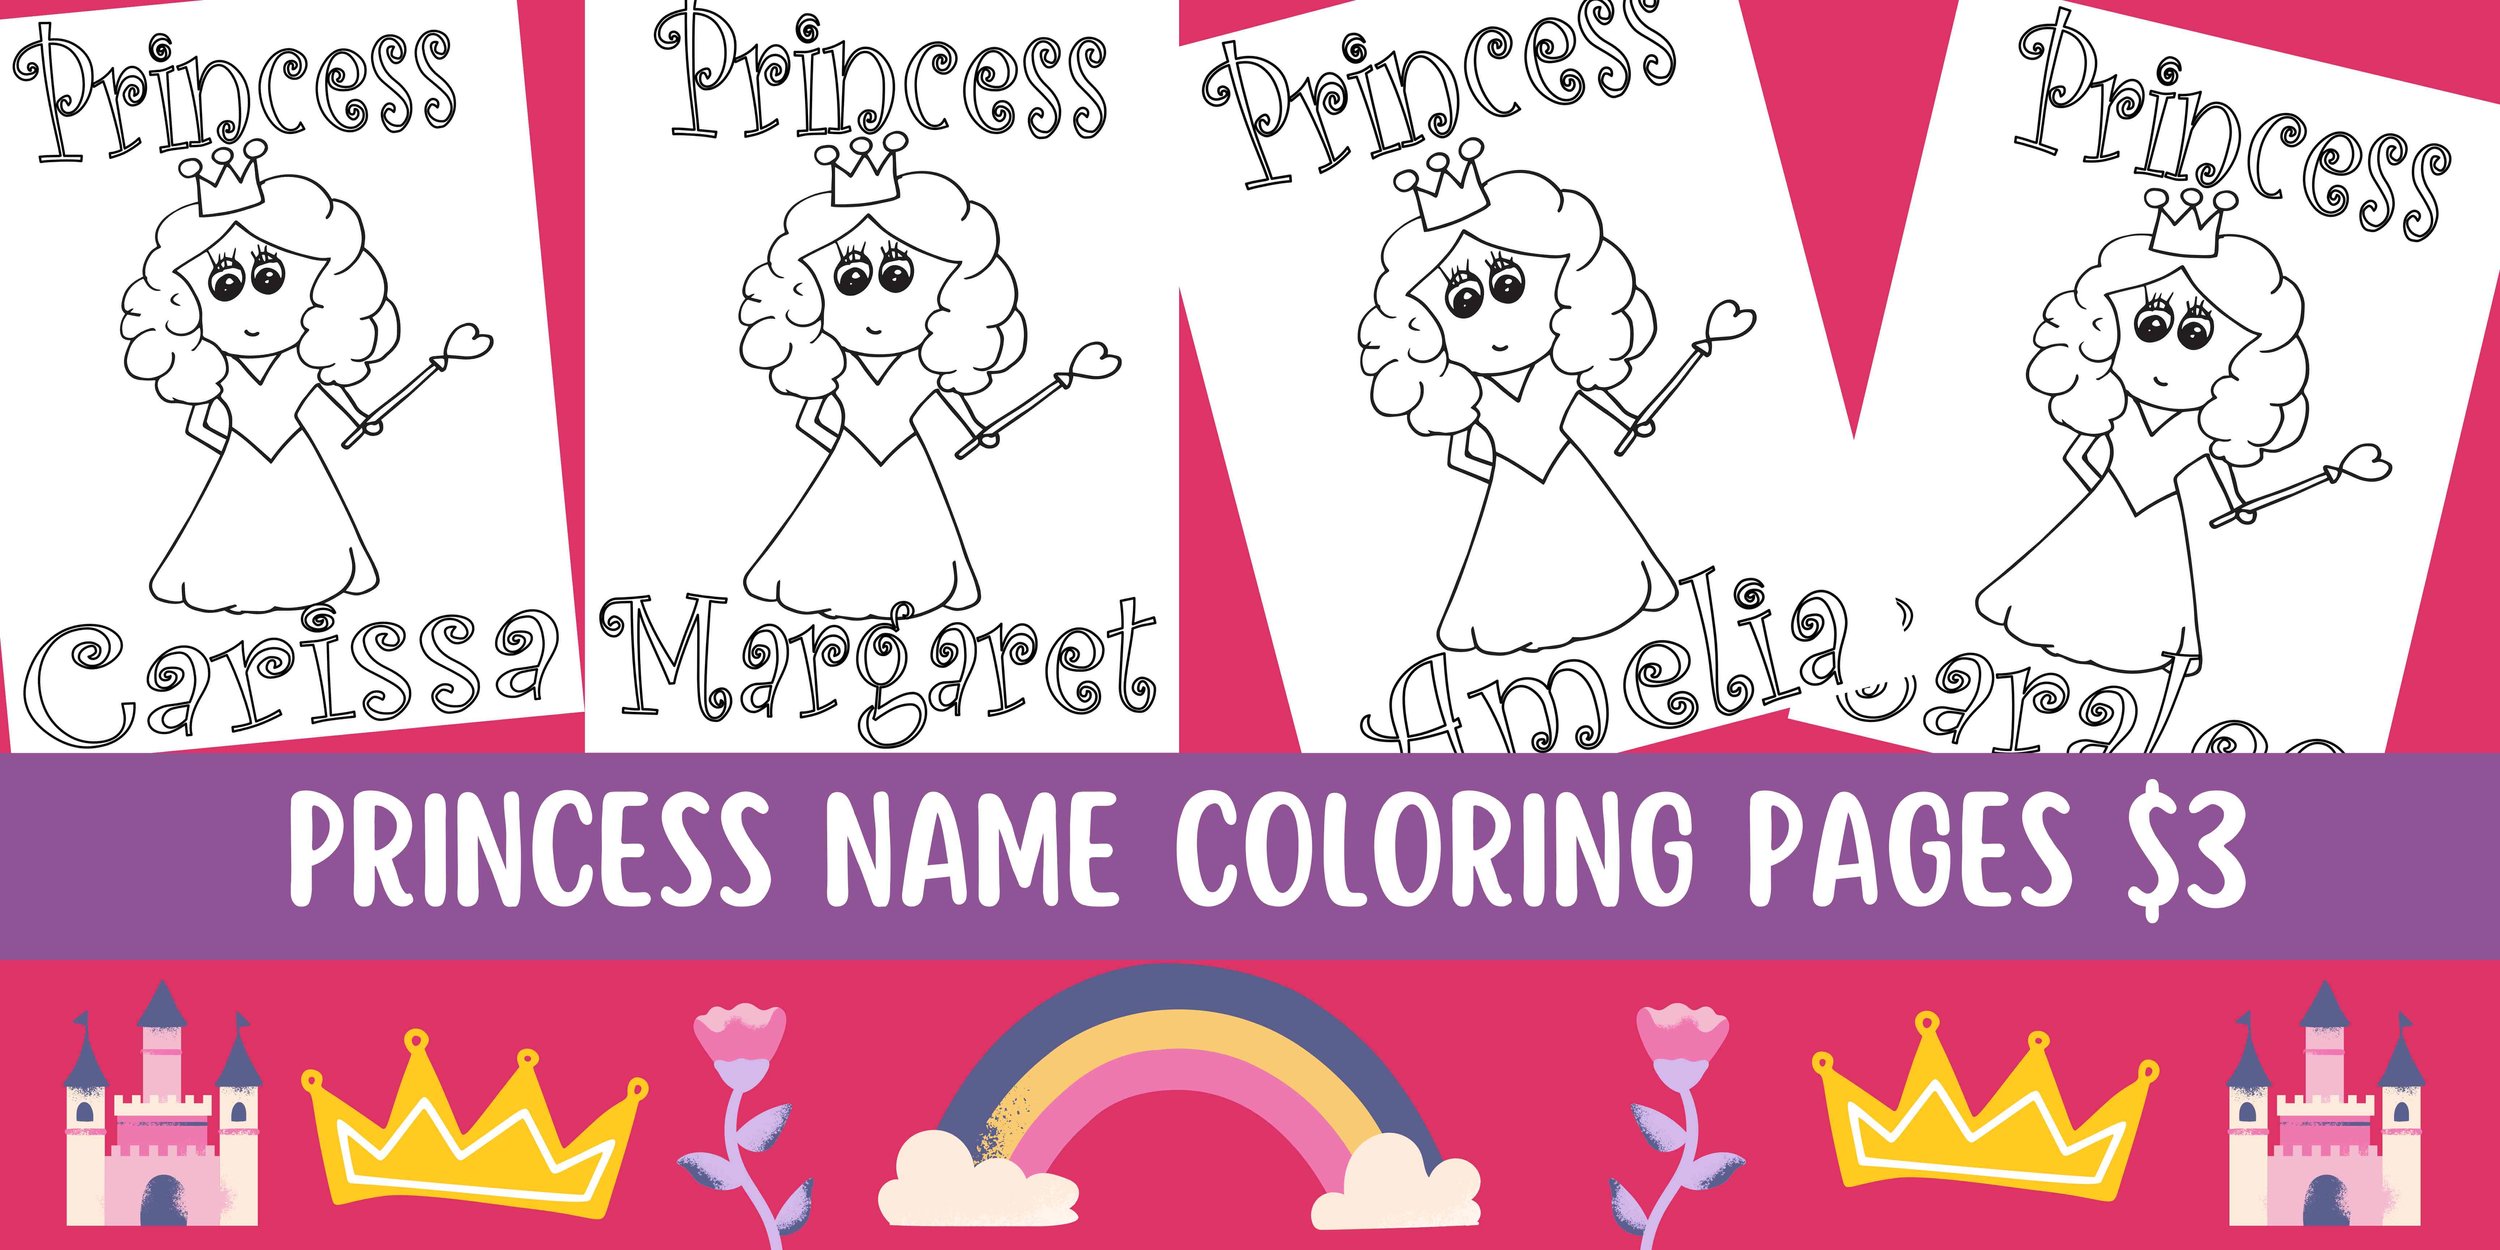 a collage of princess name coloring pages and text "princess name coloring pages $3"